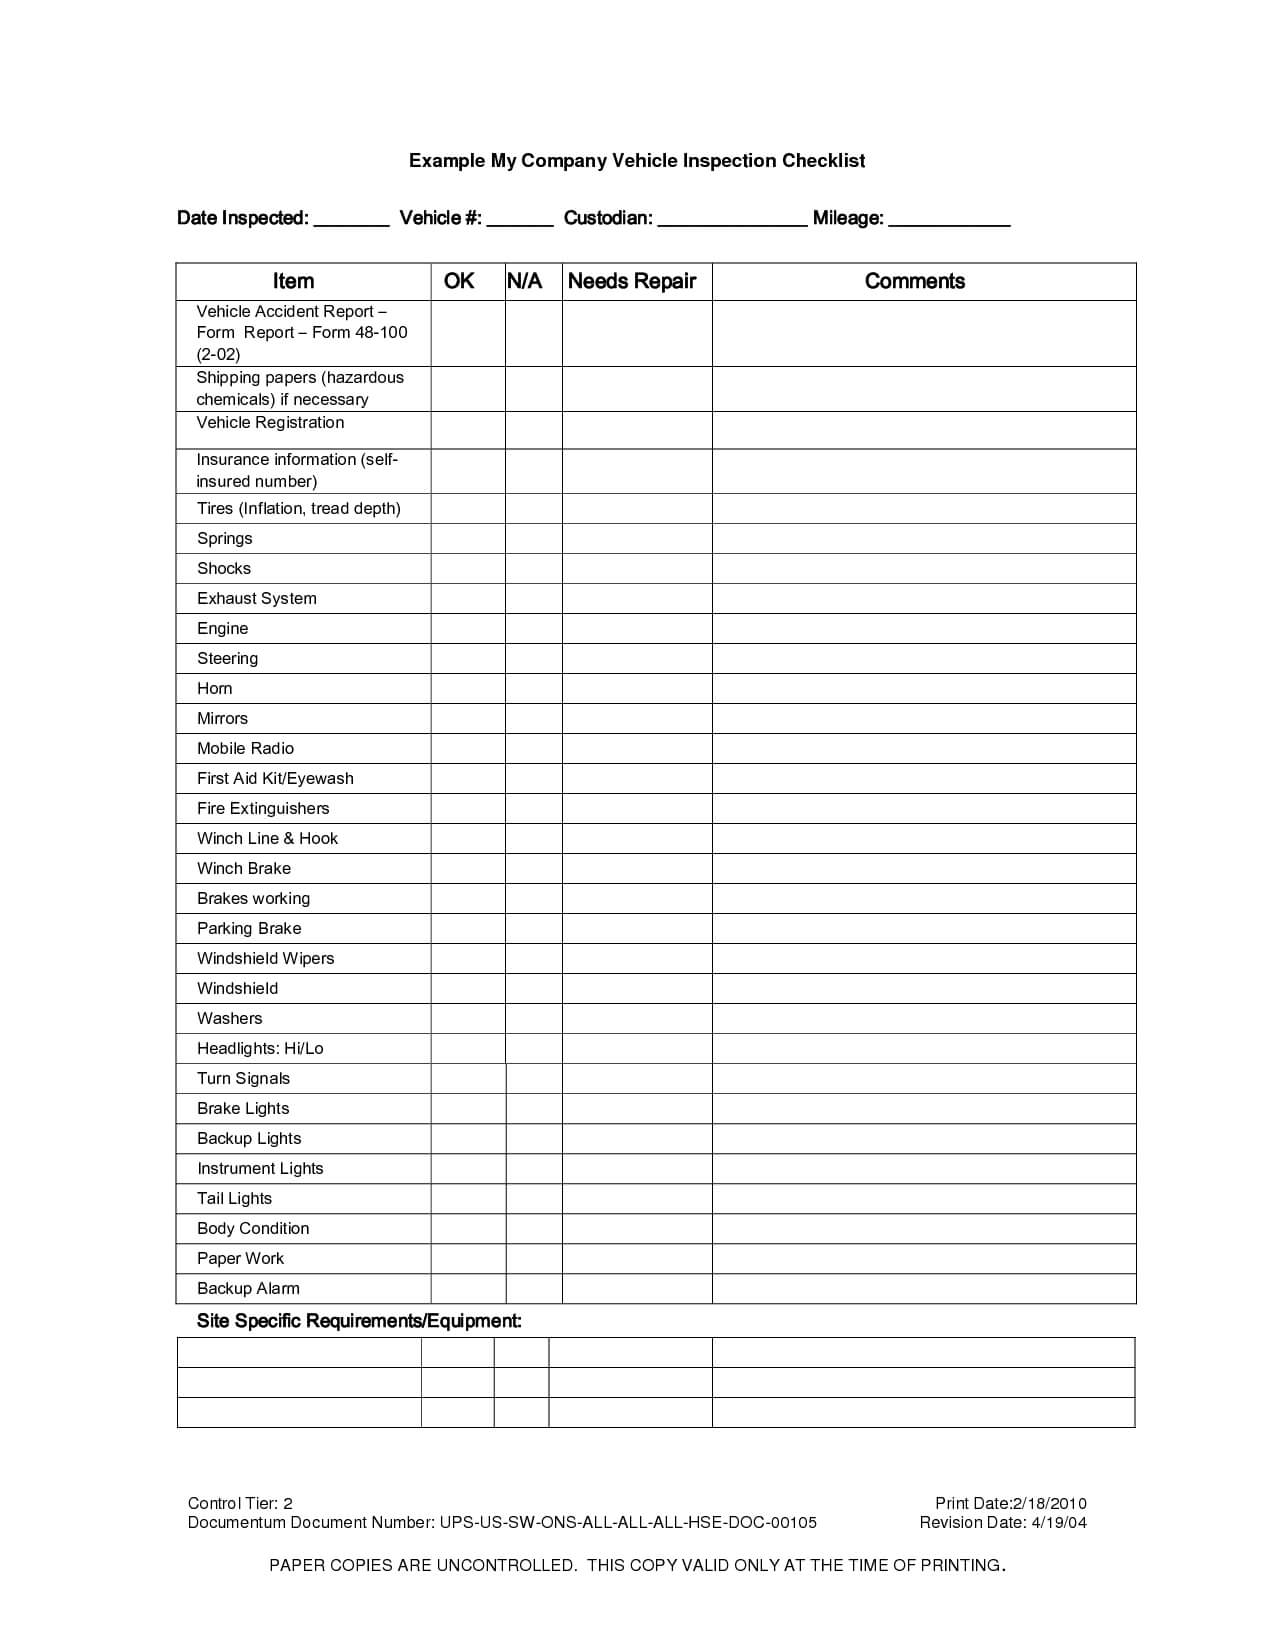 Vehicle Inspection Checklist Template | Vehicle Inspection Inside Vehicle Inspection Report Template